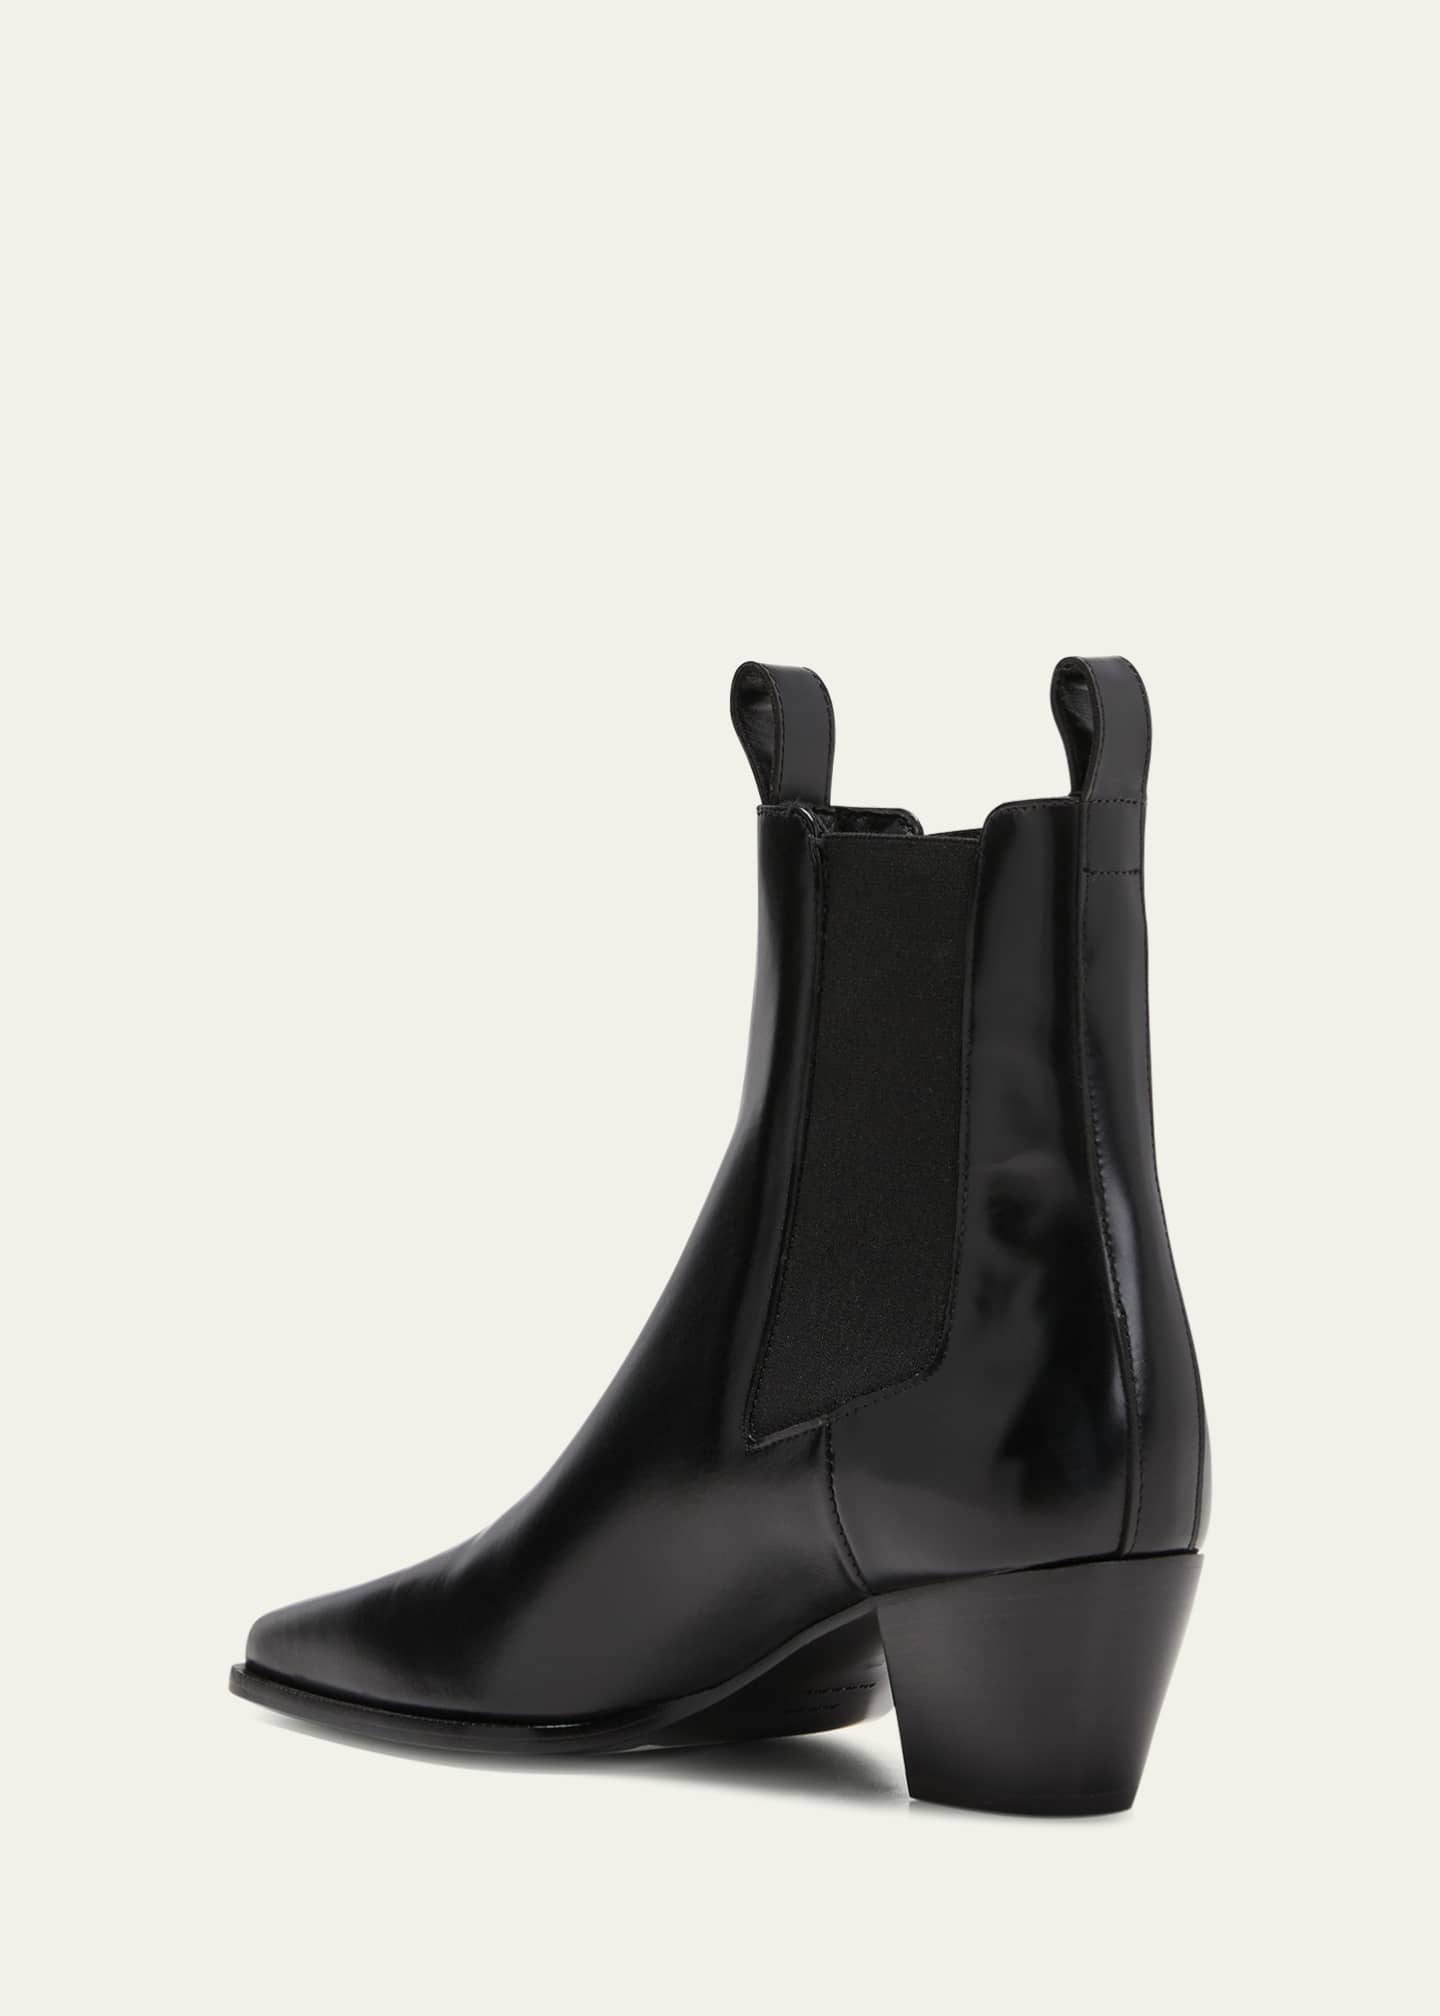 Toteme City Calfskin Chelsea Ankle Boots - Bergdorf Goodman